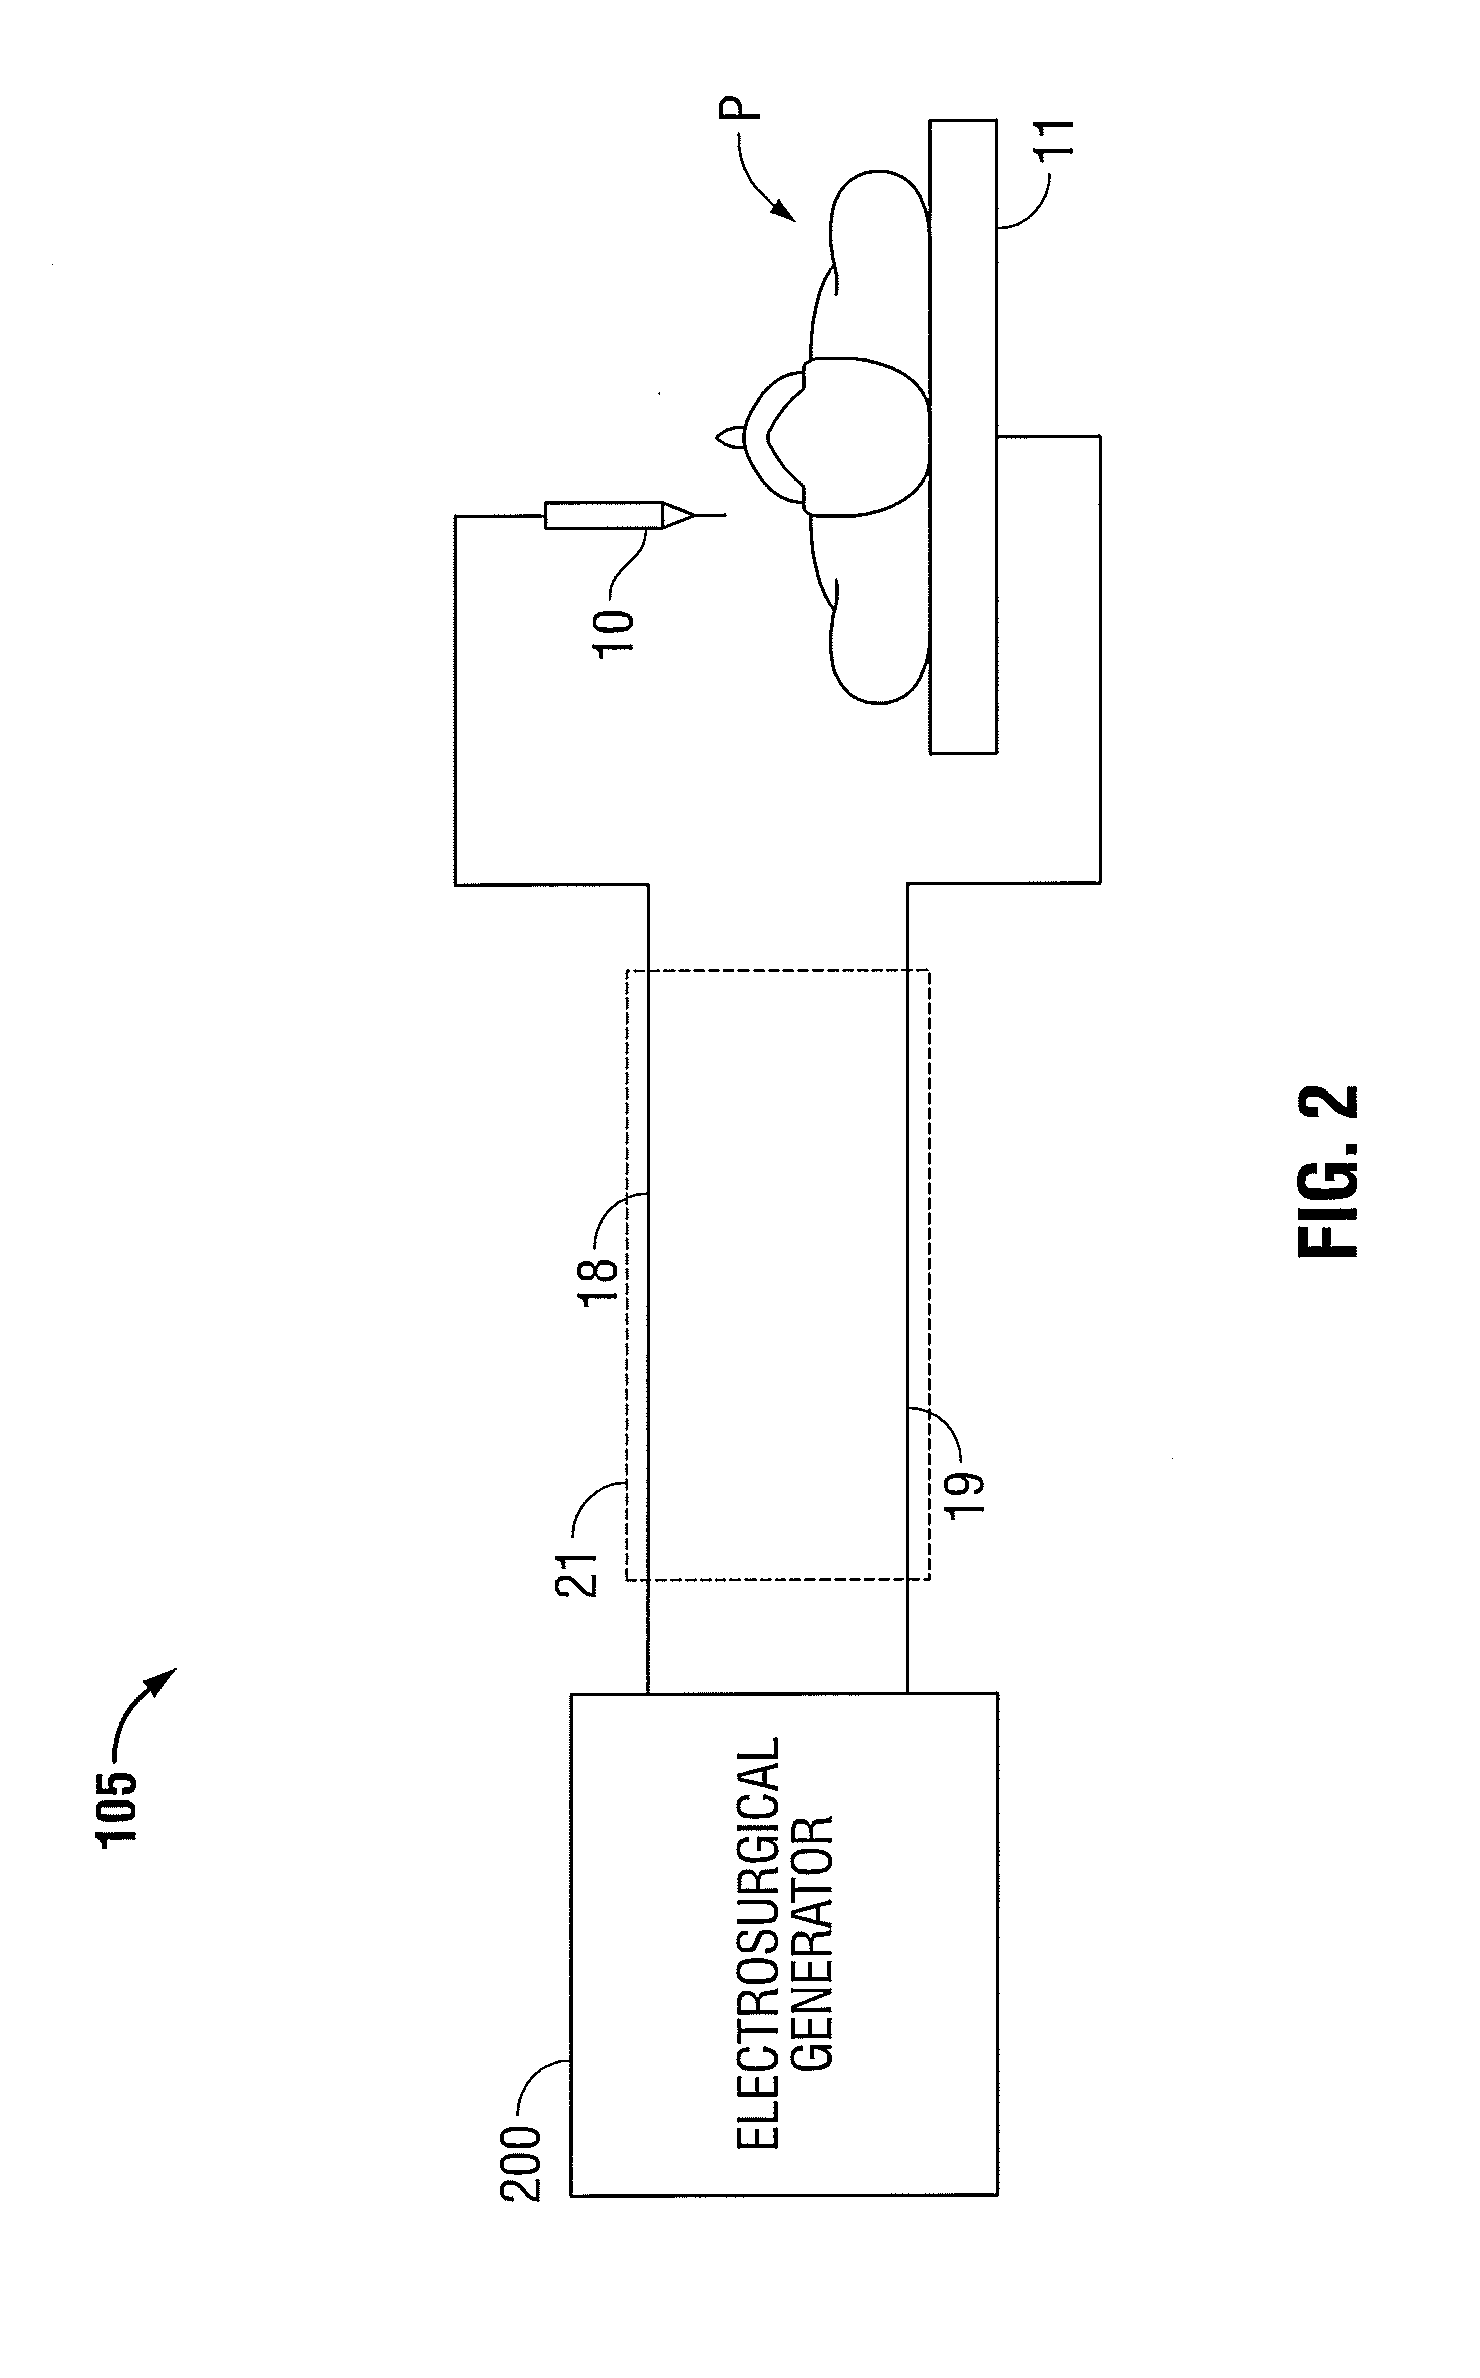 Electrosurgical Apparatus with Integrated Energy Sensing at Tissue Site